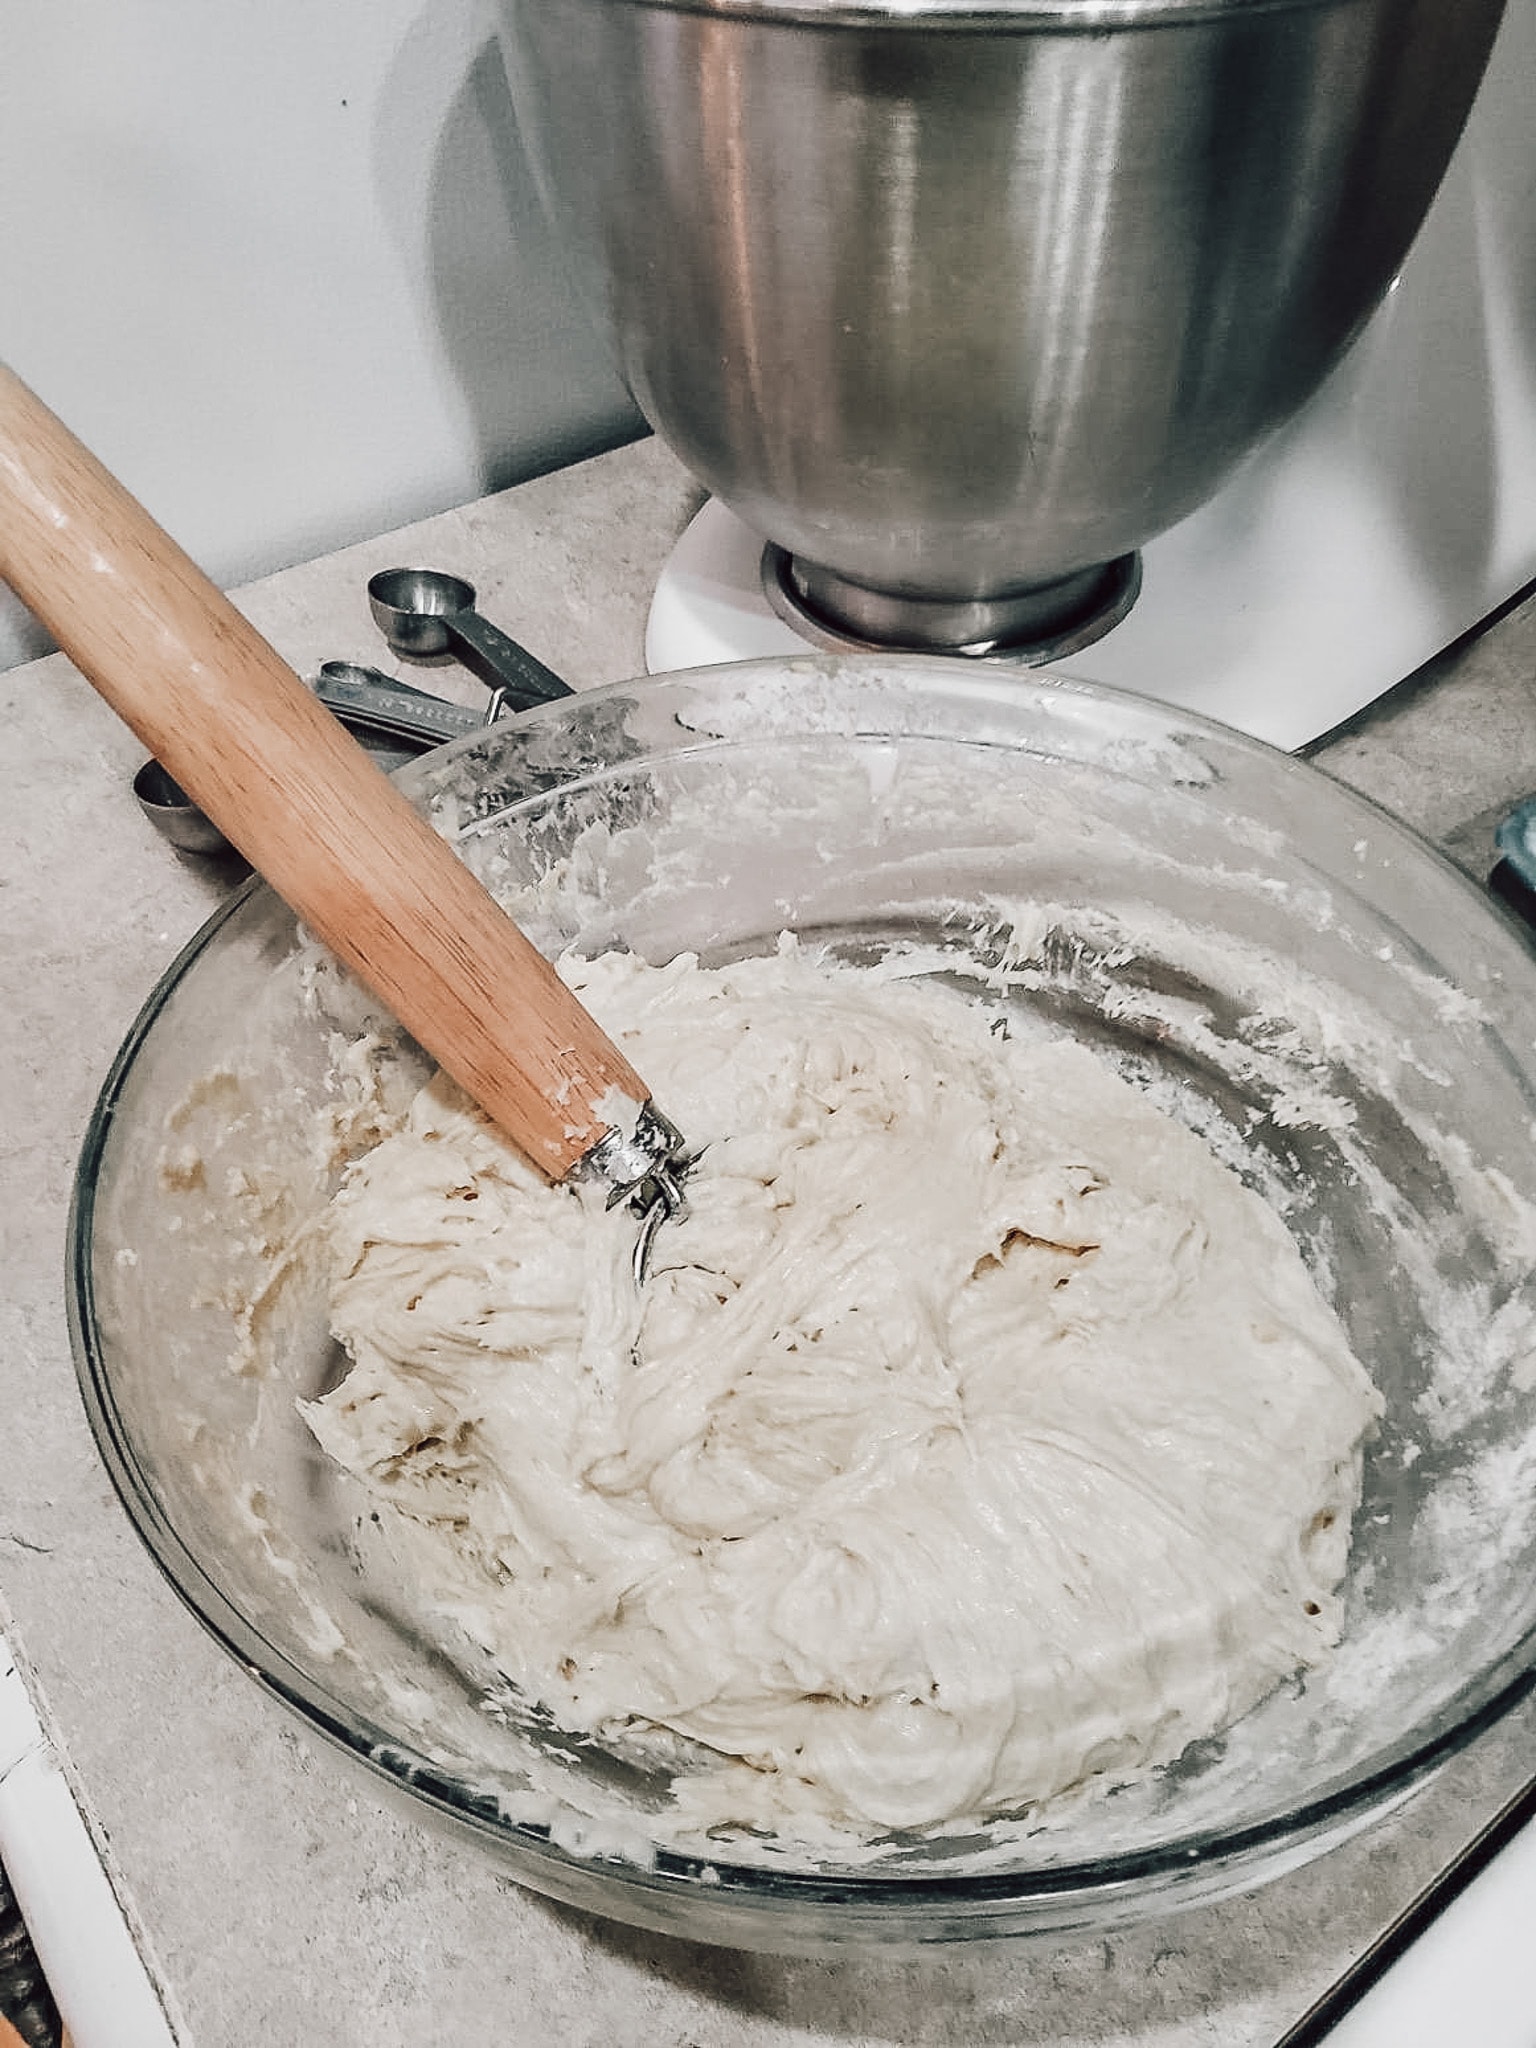 Place plastic wrap over the bowl and allow it to sit at room temperature overnight or 8-24 hours. Add baking powder and baking soda after the 8-24 hours have passed. Einkorn biscuits